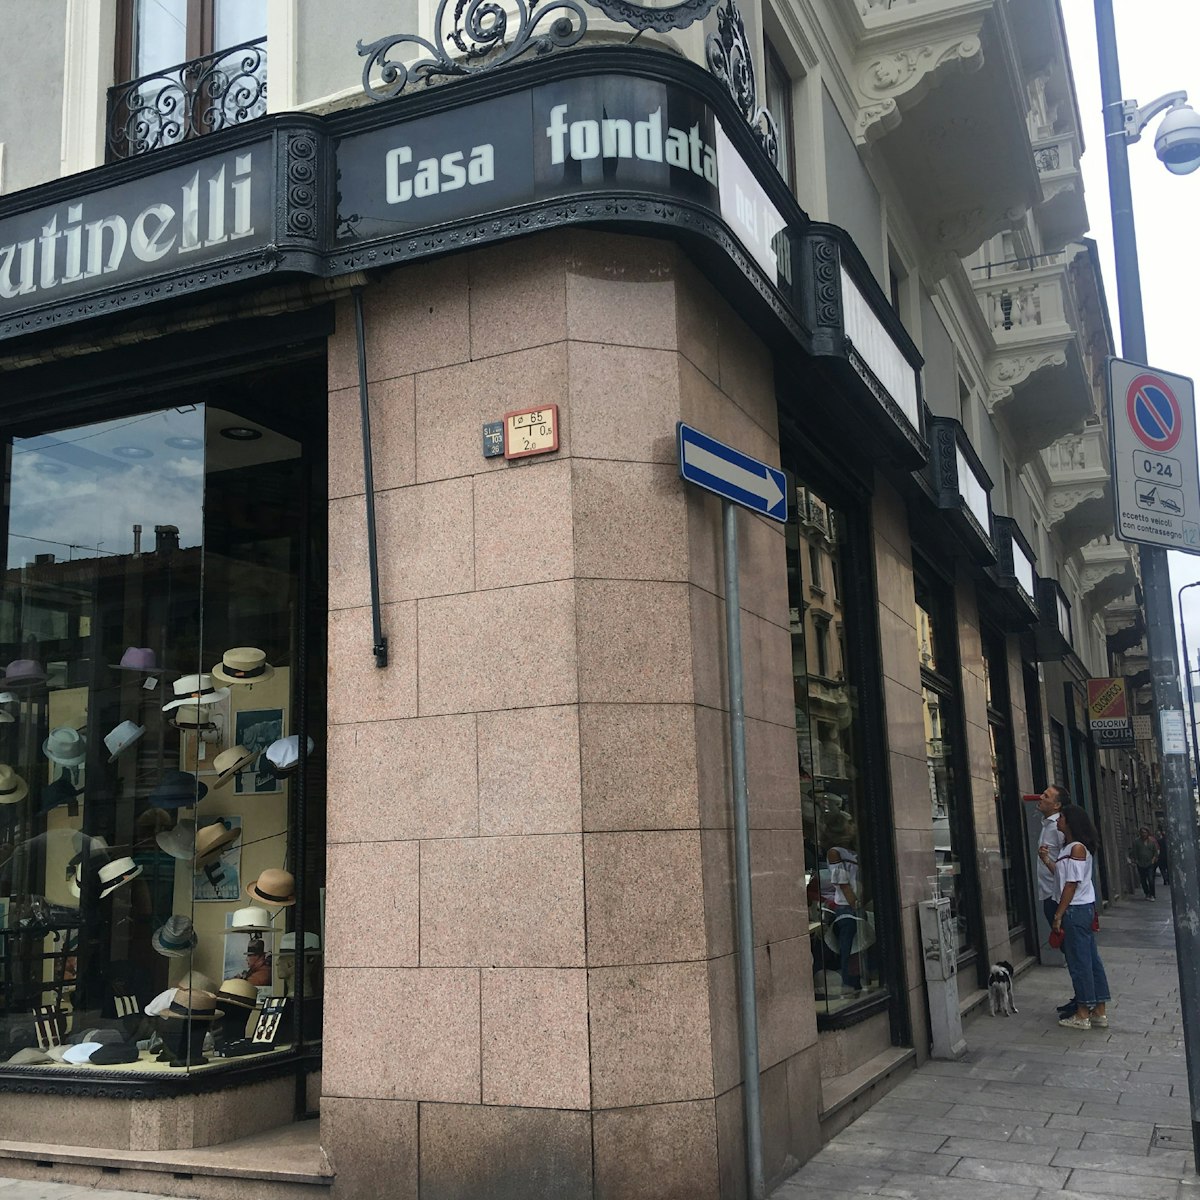 The Mutinelli shop front